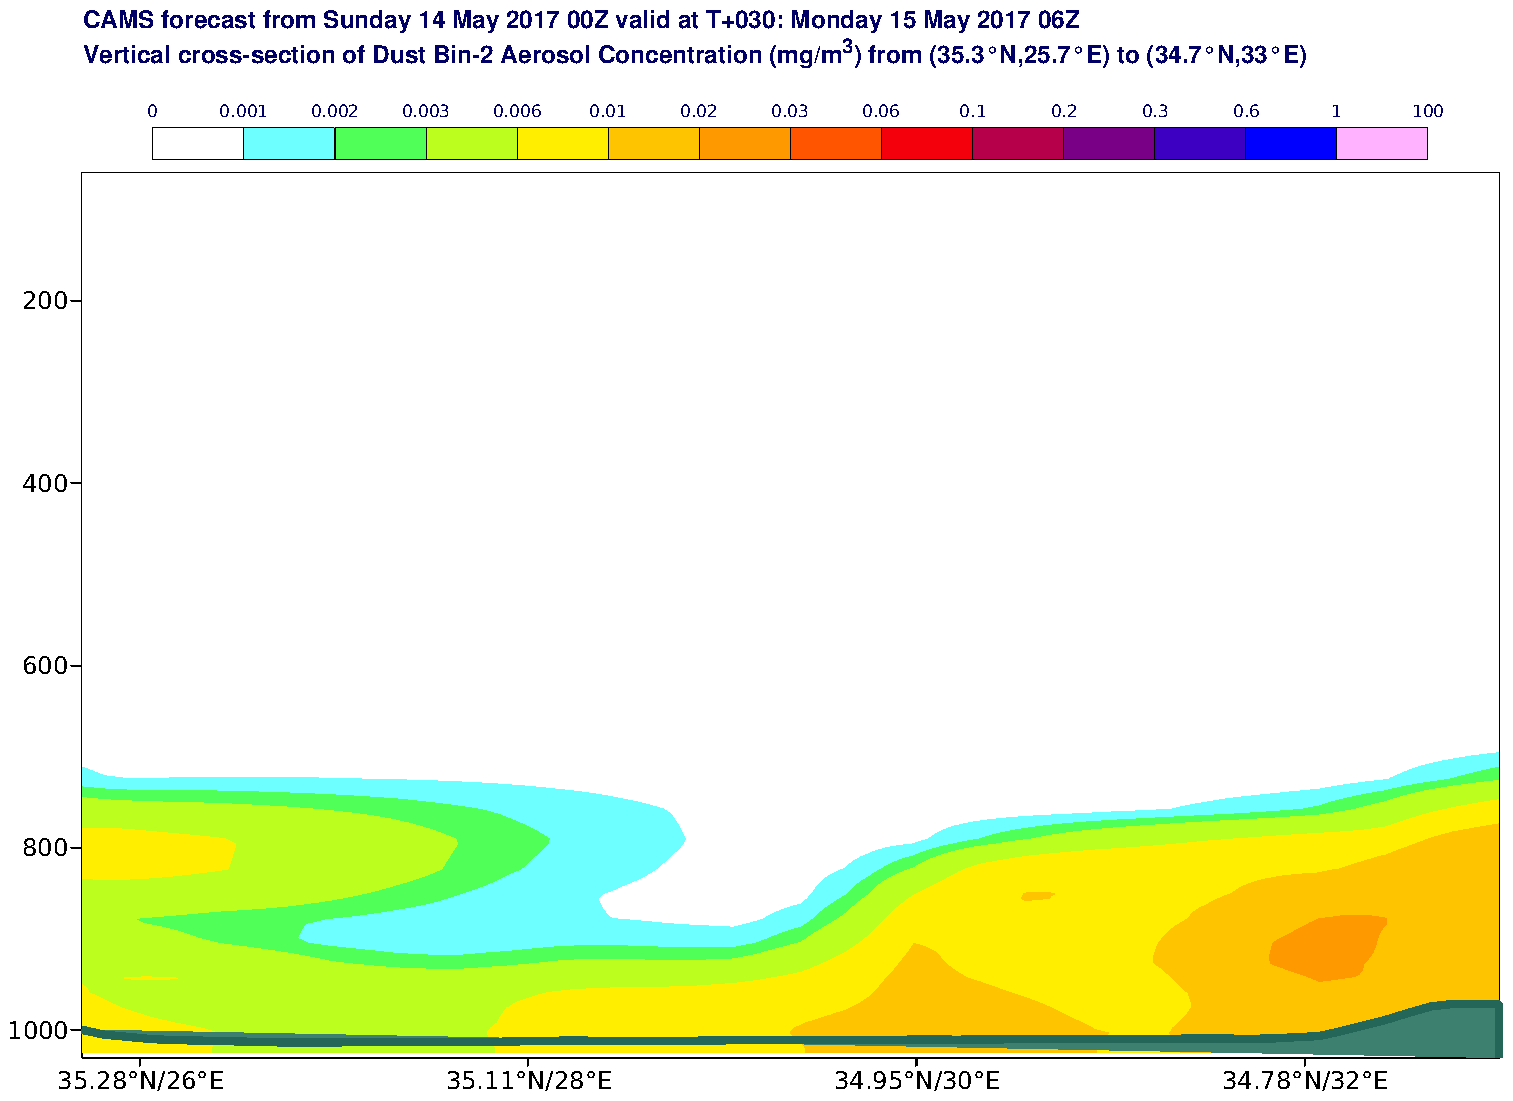 Vertical cross-section of Dust Bin-2 Aerosol Concentration (mg/m3) valid at T30 - 2017-05-15 06:00